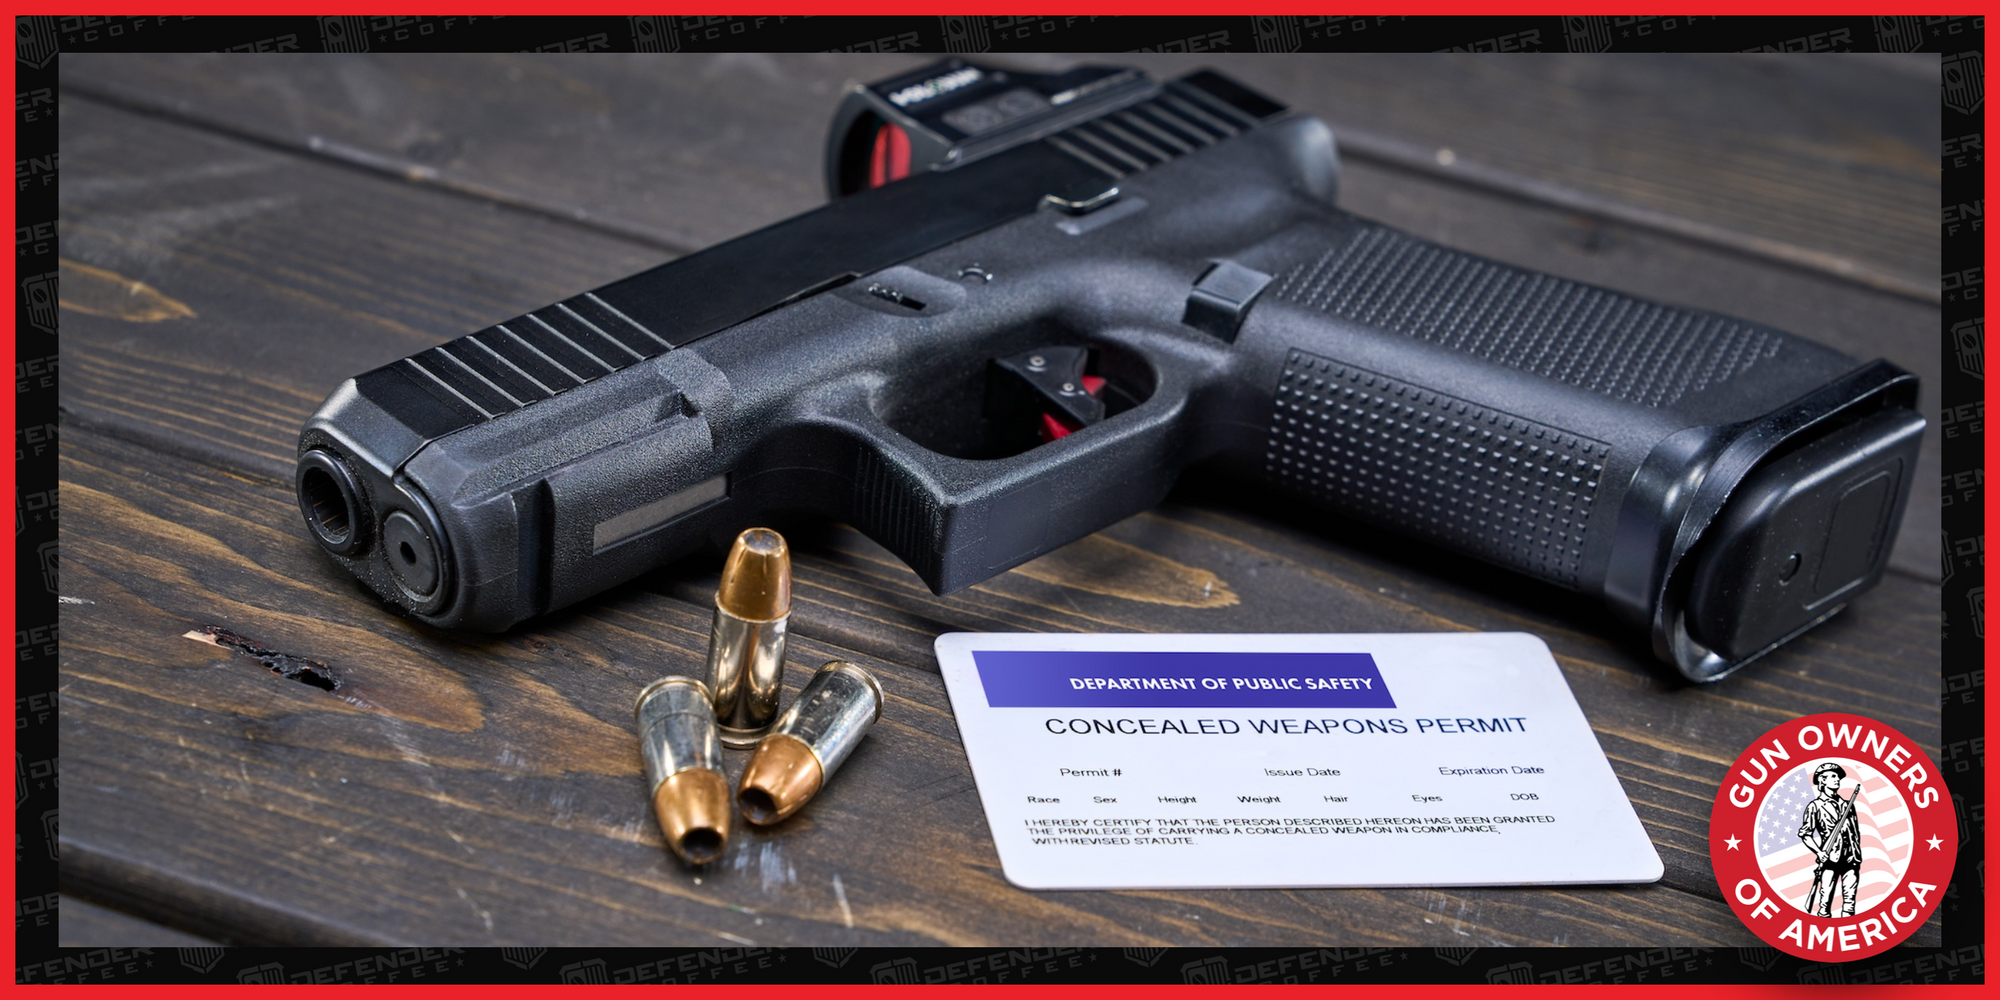 🚨[TAKE ACTION] TELL CONGRESS: RECOGNIZE THE 2A RIGHTS OF ALL AMERICANS